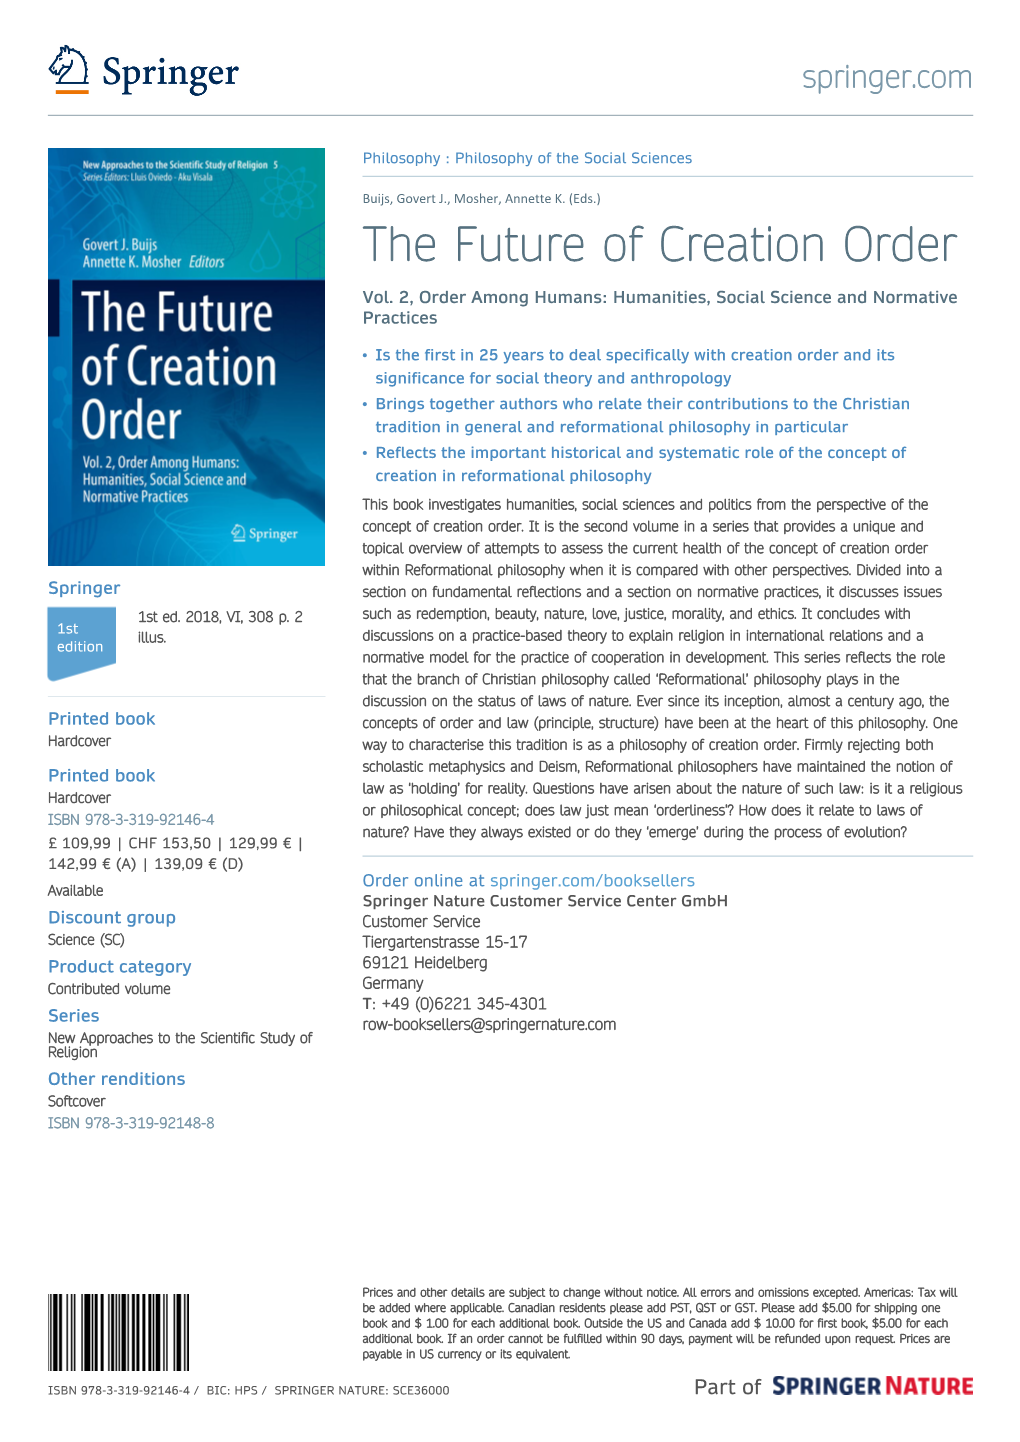 The Future of Creation Order Vol